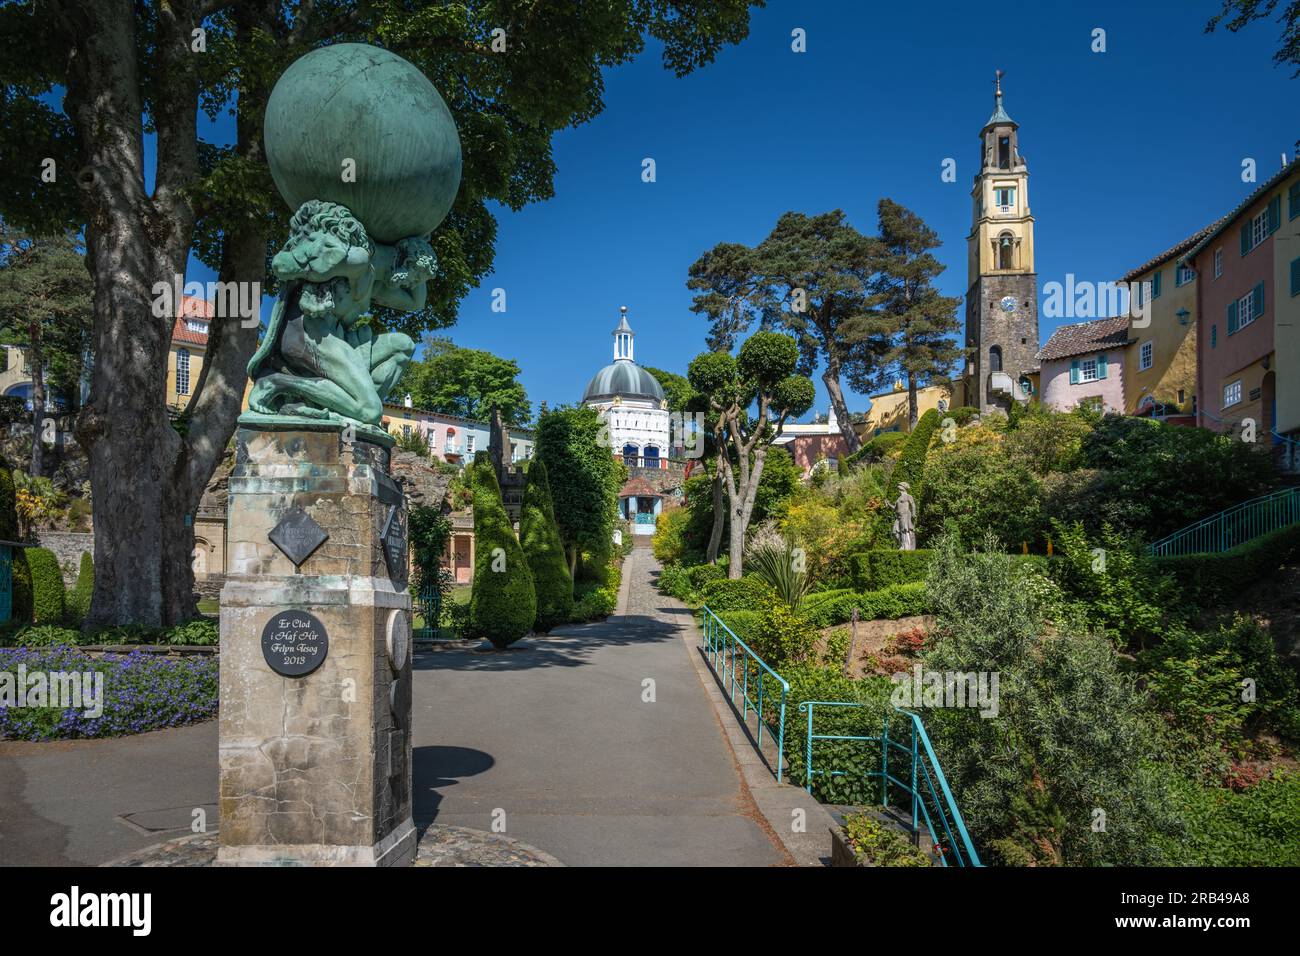 The Bell Tower & Herkules Statue, Portmeirion, North Wales, Großbritannien Stockfoto